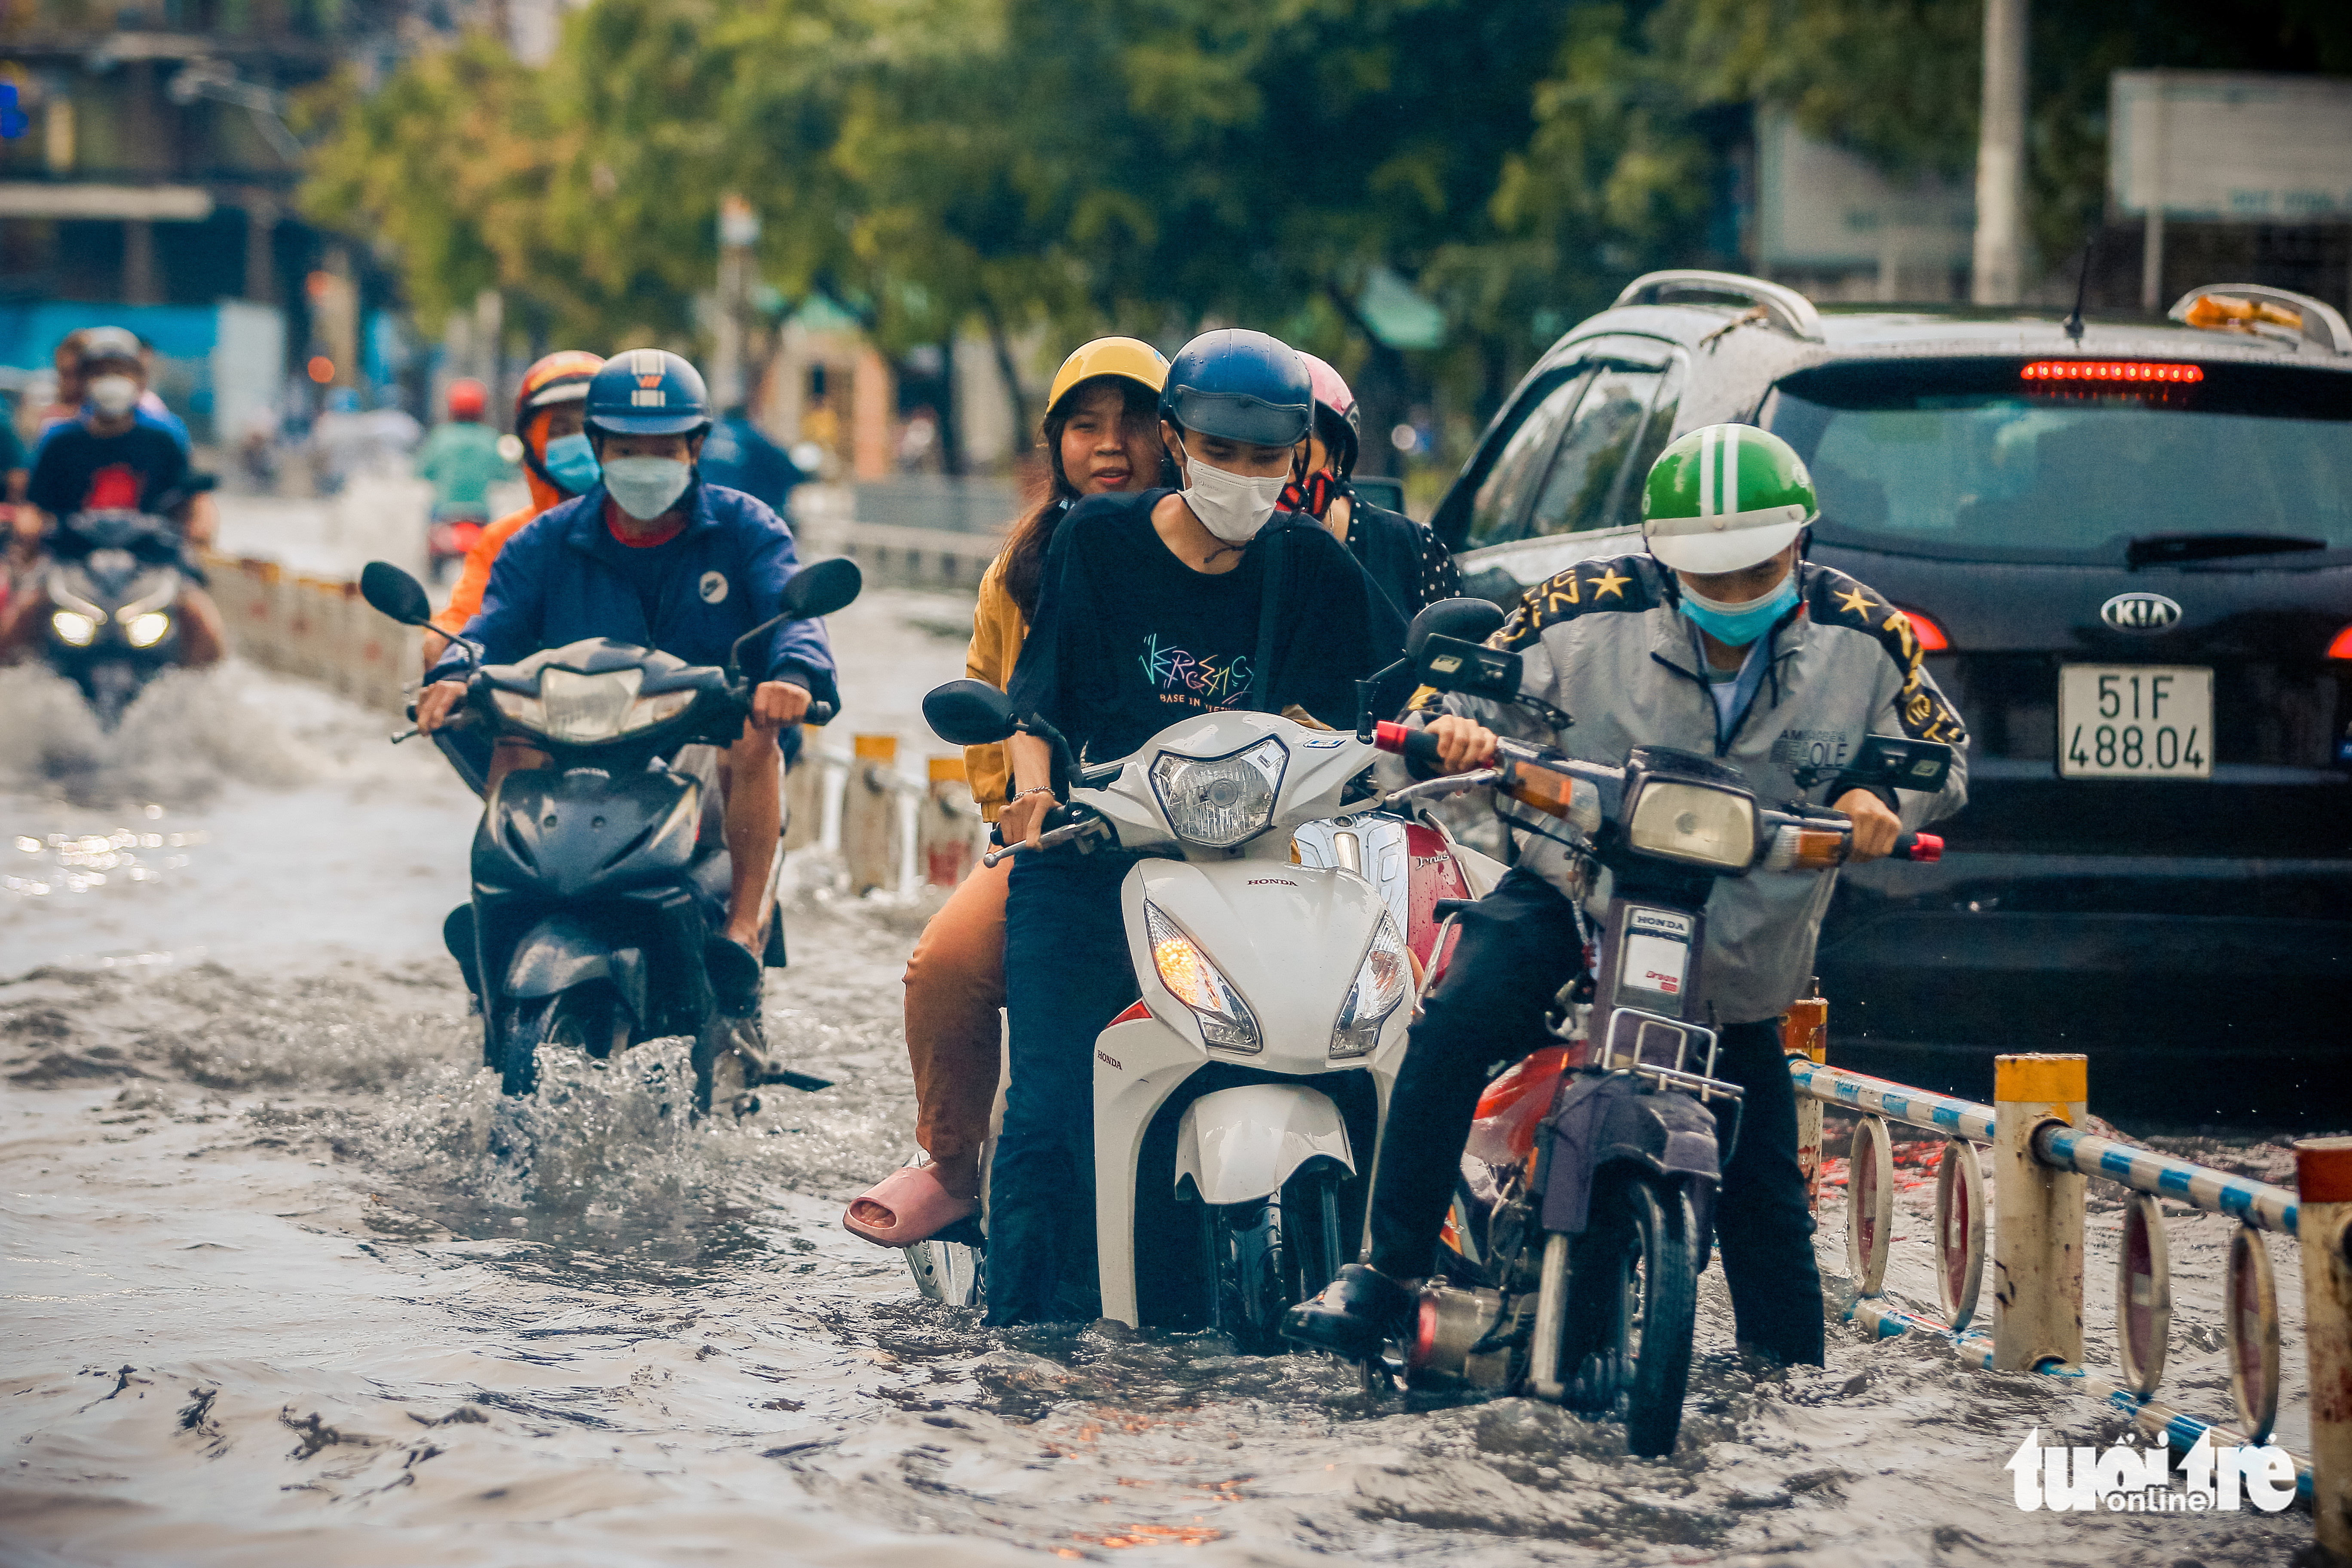 Motorcyclists struggle to travel on flooded Nguyen Van Khoi Street in Go Vap District, Ho Chi Minh City, July 20, 2022. Photo: Chau Tuan / Tuoi Tre